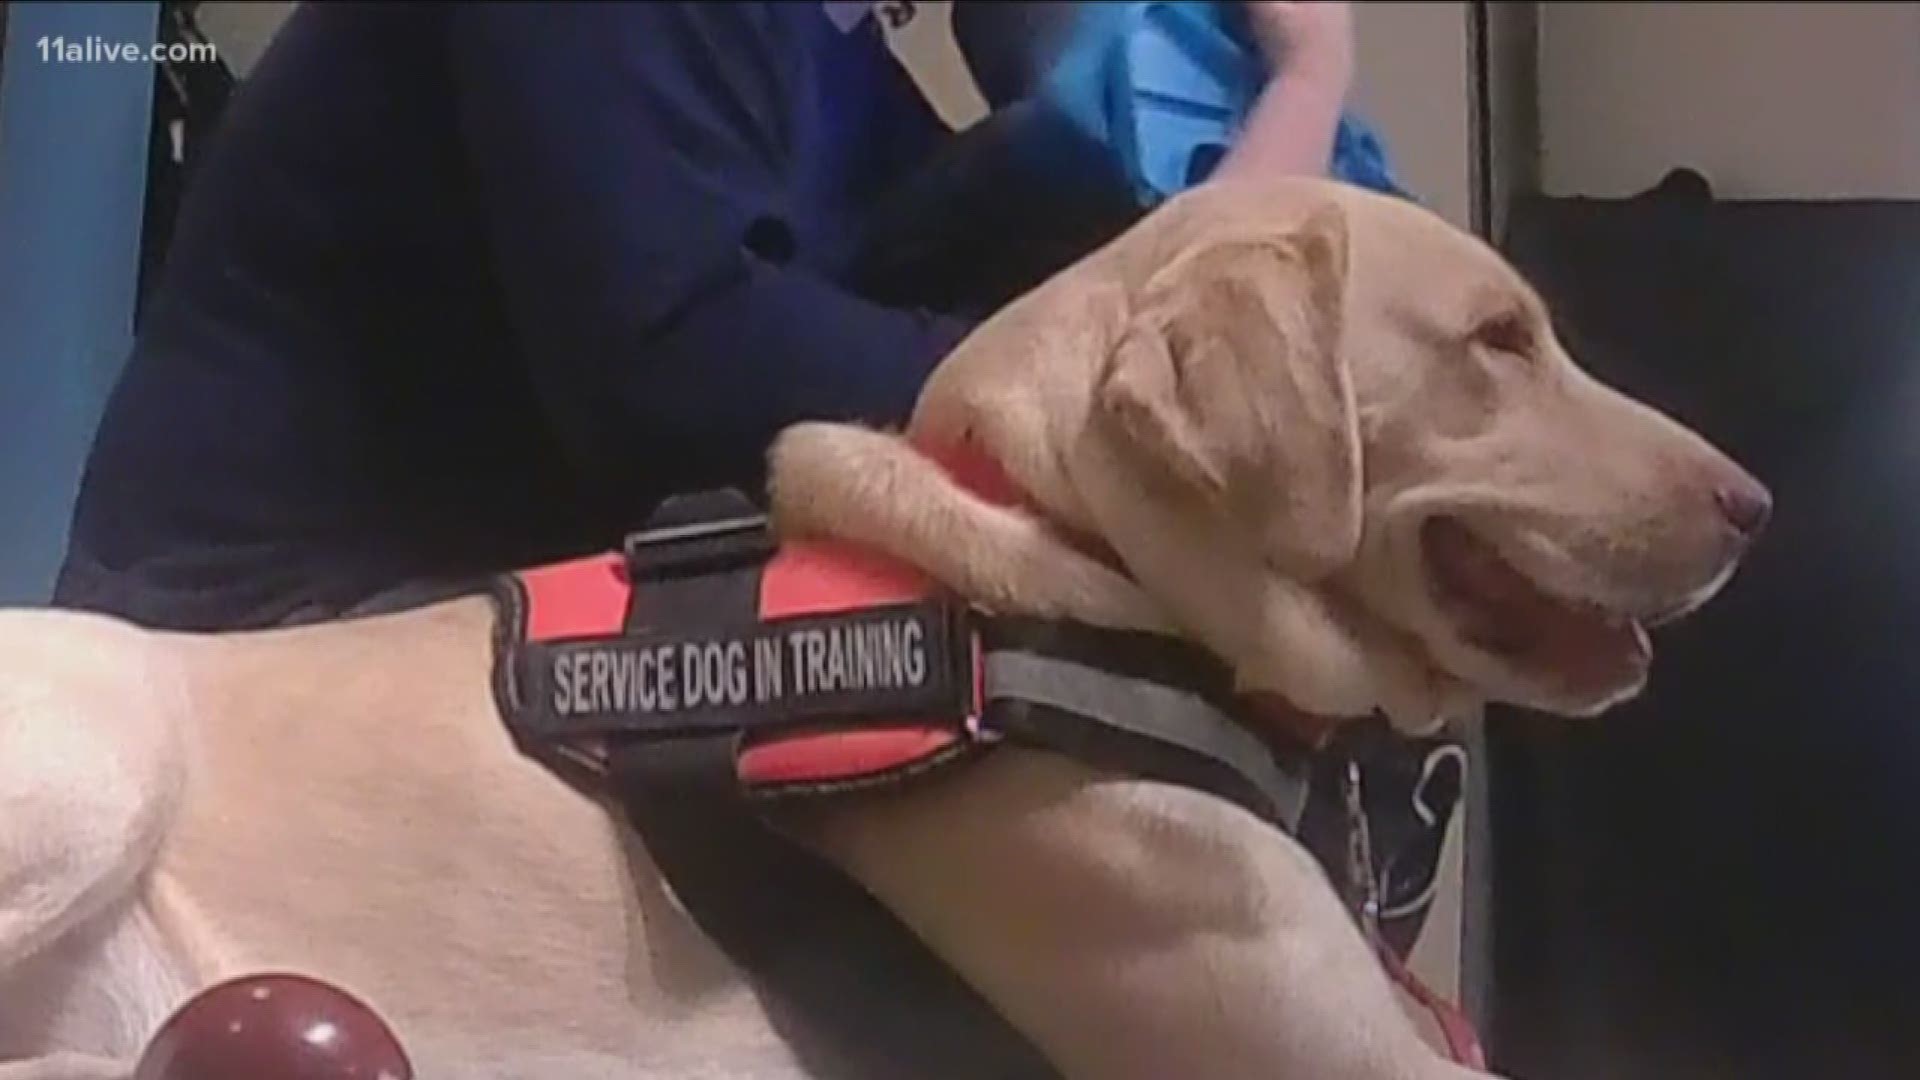 Ranger Dog Training usually trains rescue dogs how to work with military members suffering from PTSD. But now they're taking on a new challenge: training a rescue dog how to work with a child with autism.